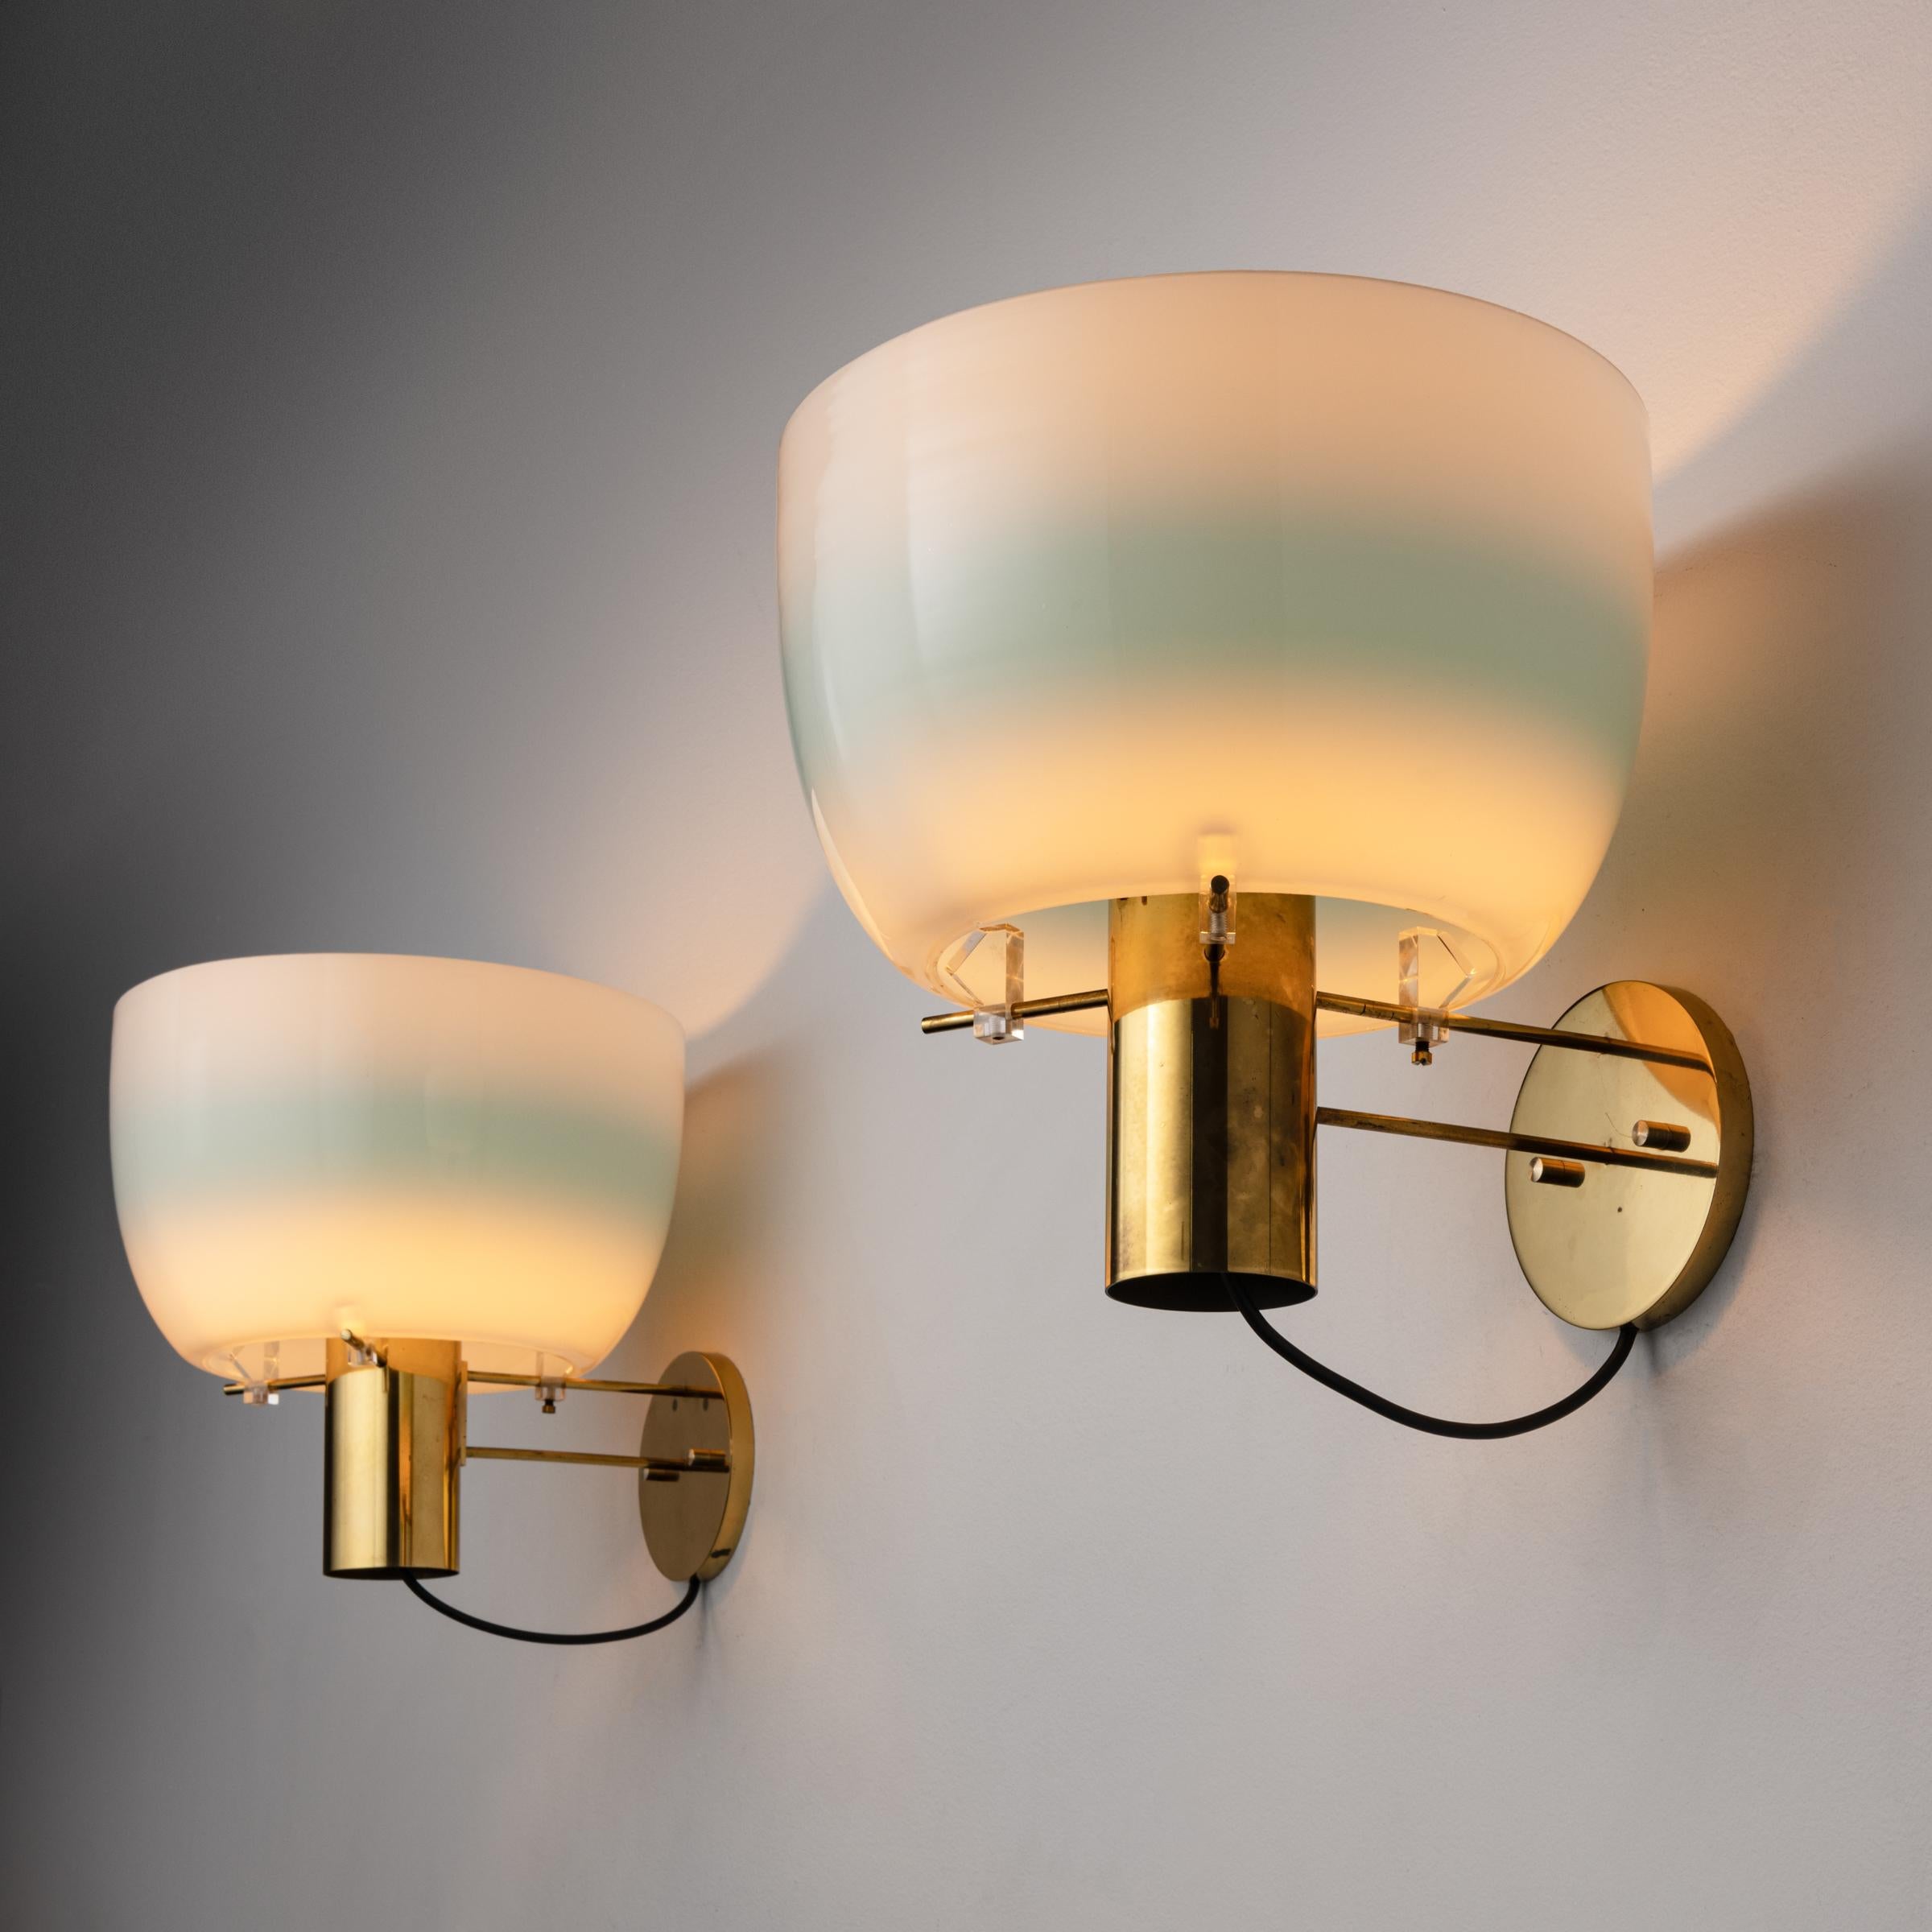 Pair of Model 1121 Sconces by Ostuni & Forti for Oluce. Designed and manufactured in Italy, circa 1950's. Opaline glass, brass, custom brass packplates. Wired for U.S. standards. We recommend : One 75w maximum E27 bulb per fixture. Bulbs not